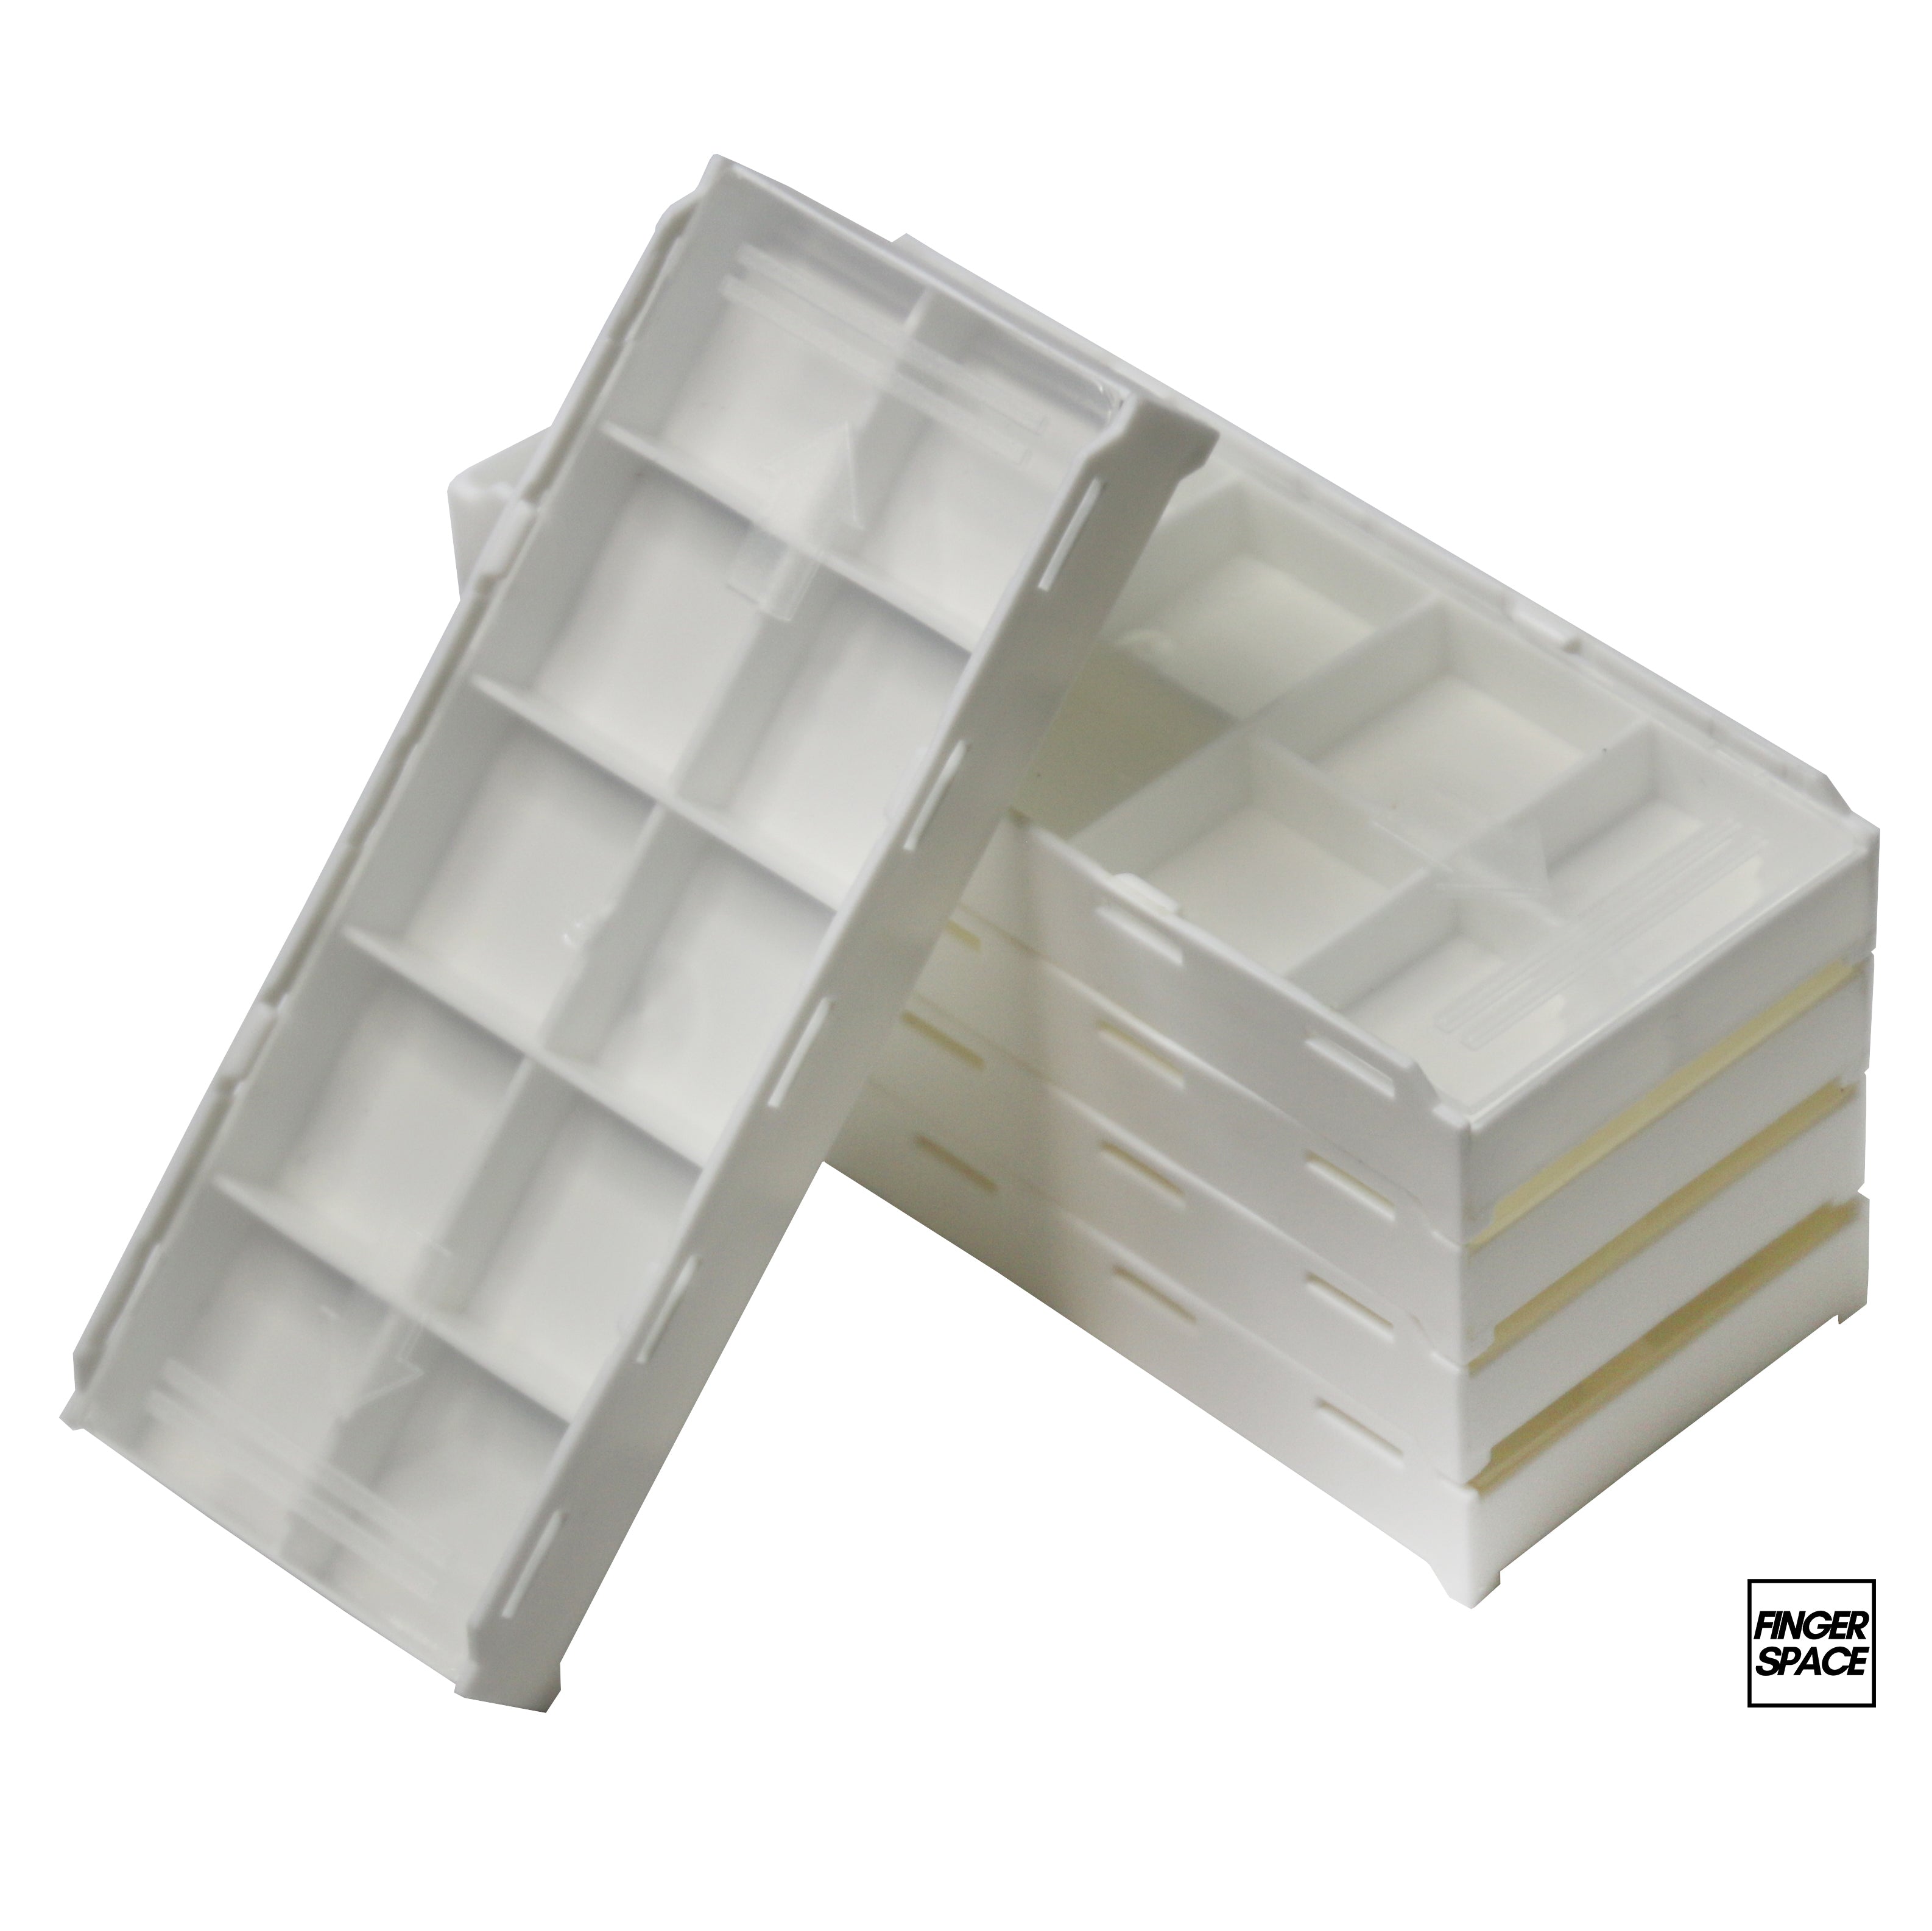 5-Pack of White "Space Cases" - Modular Stacking Storage Boxes